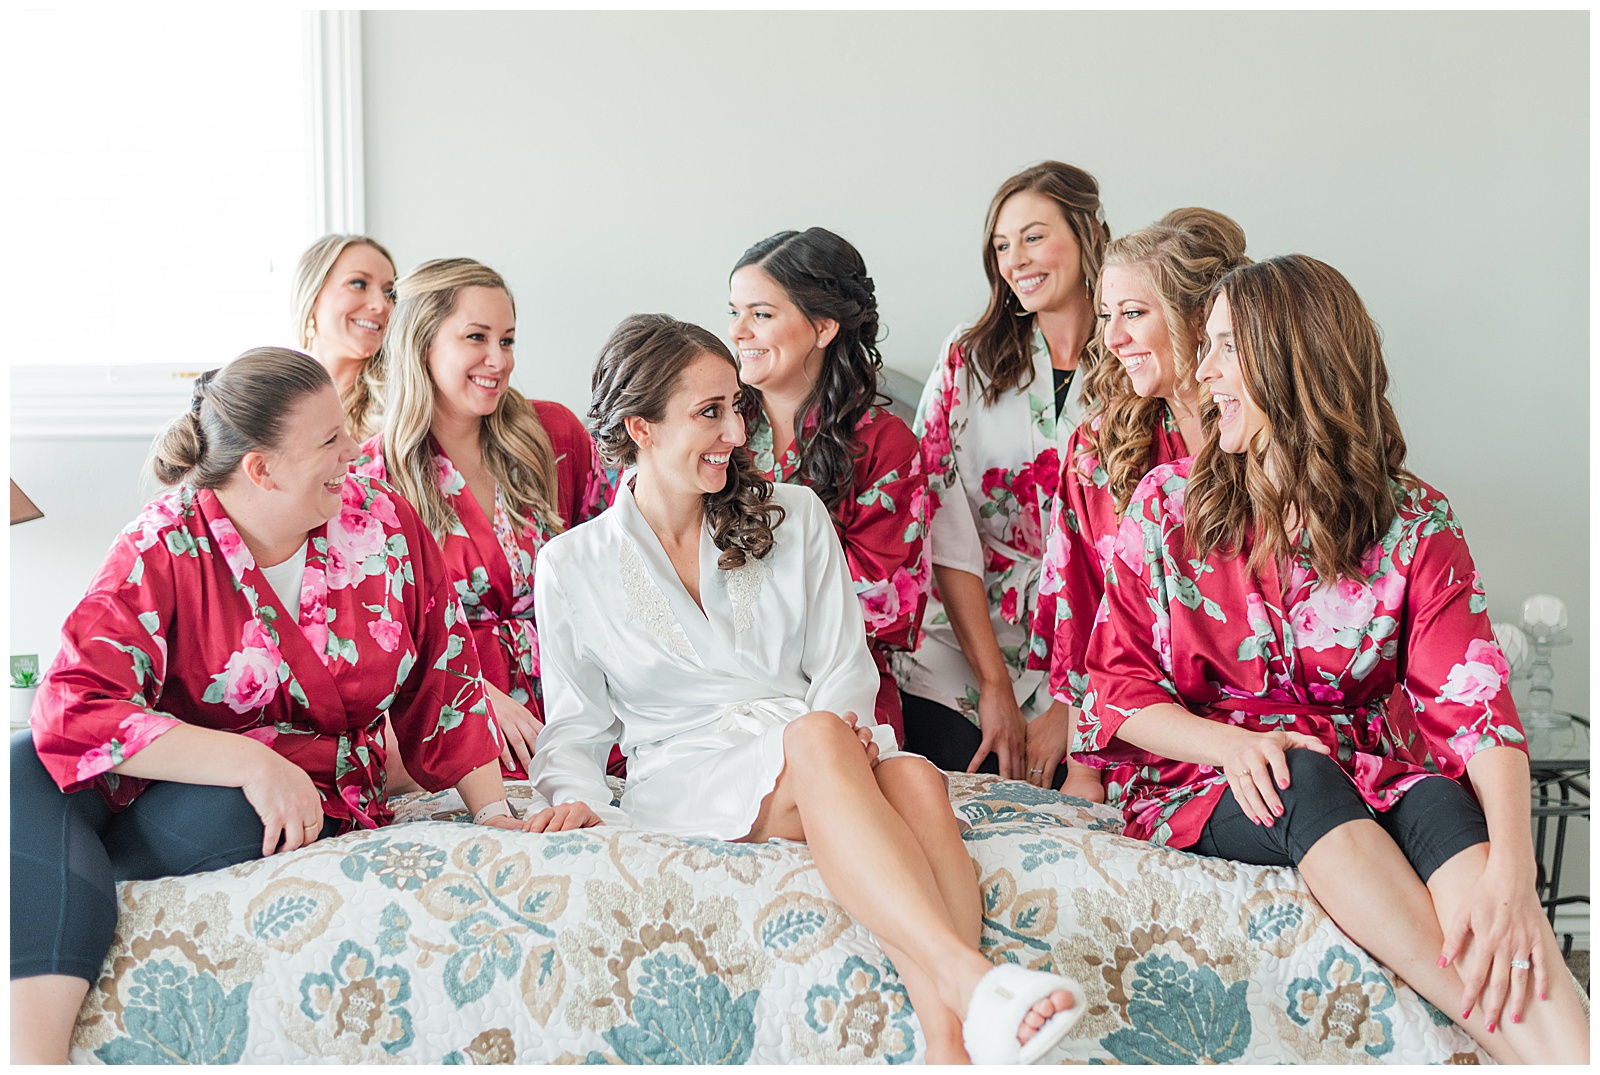 group of women sitting on a bed in pink robes laughing